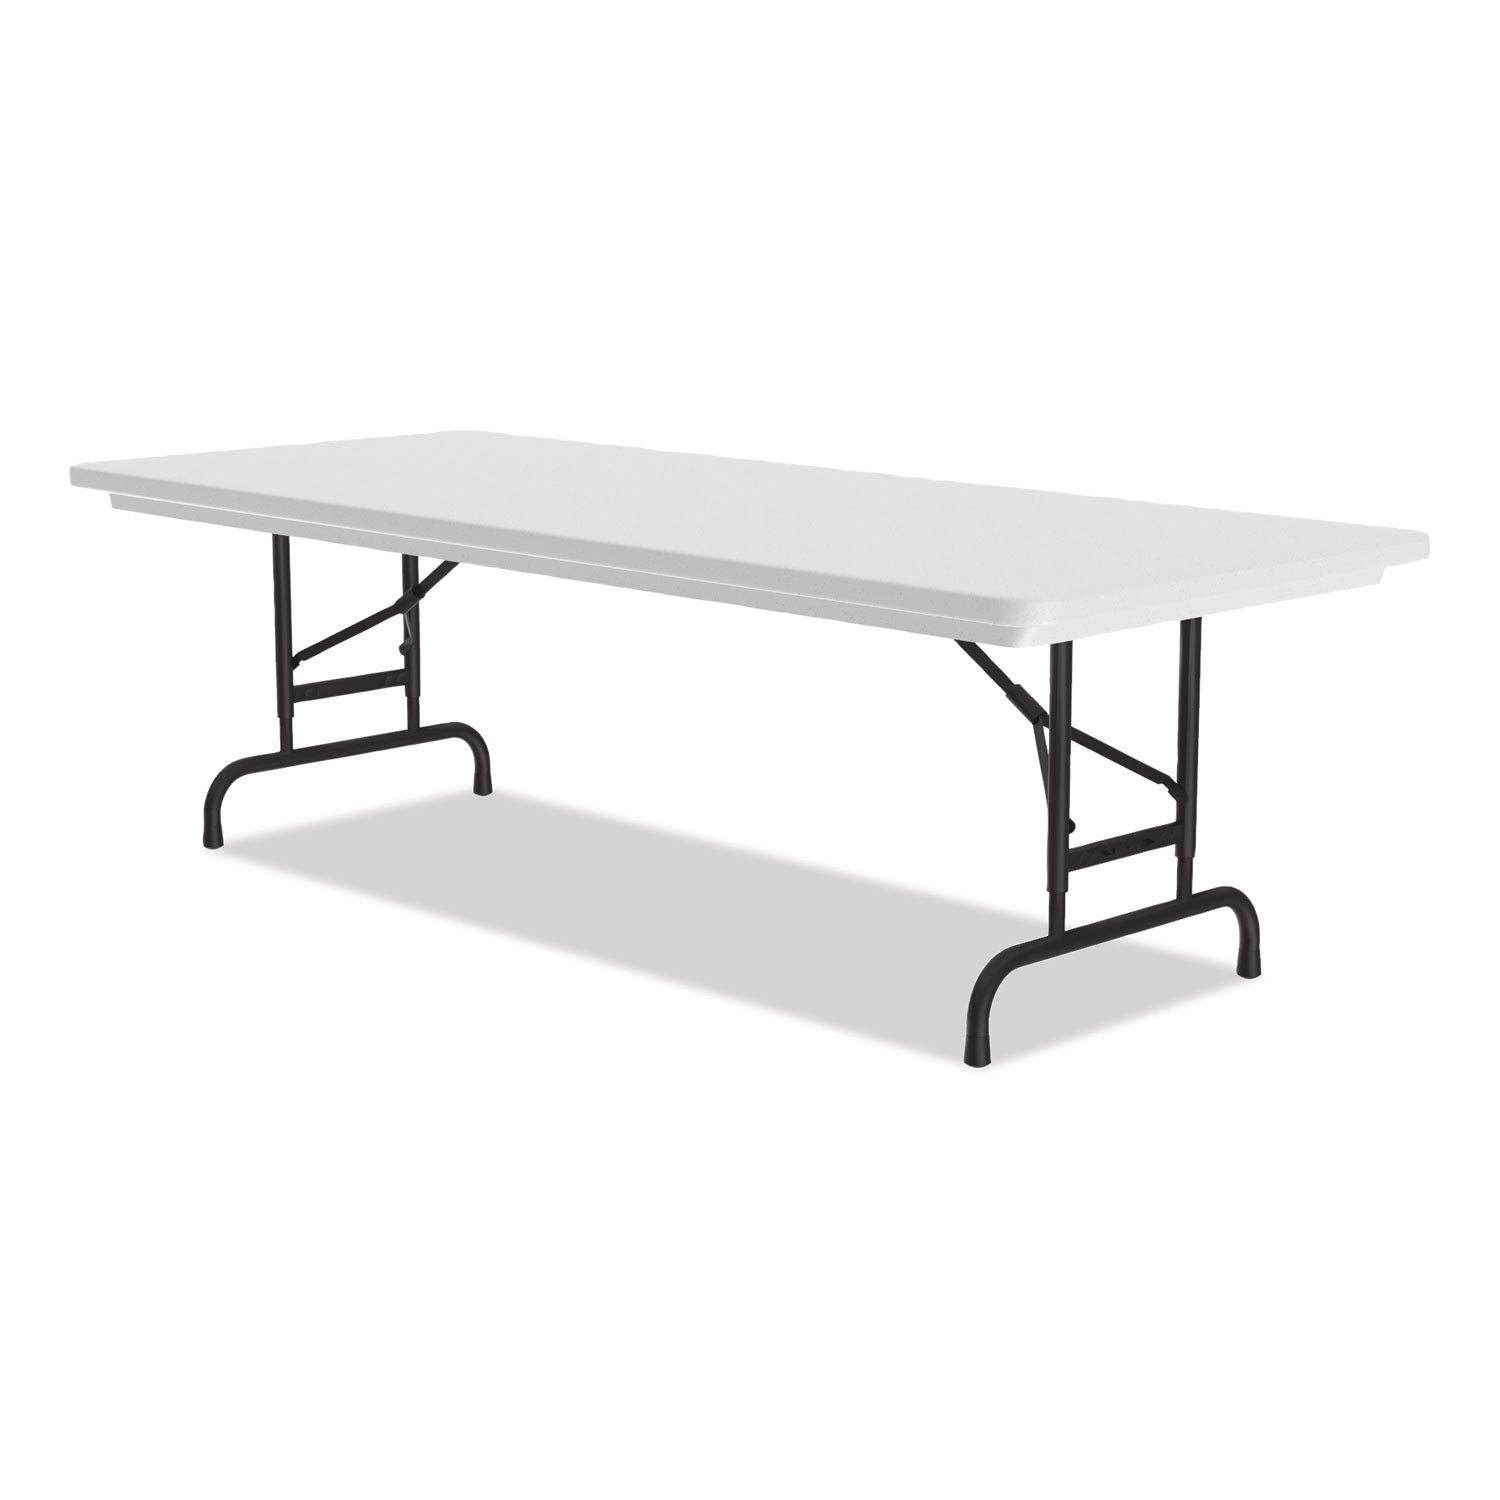 adjustable-folding-tables-rectangular-60-x-30-x-22-to-32-gray-top-black-legs-4-pallet-ships-in-4-6-business-days_crlra3060234p - 6